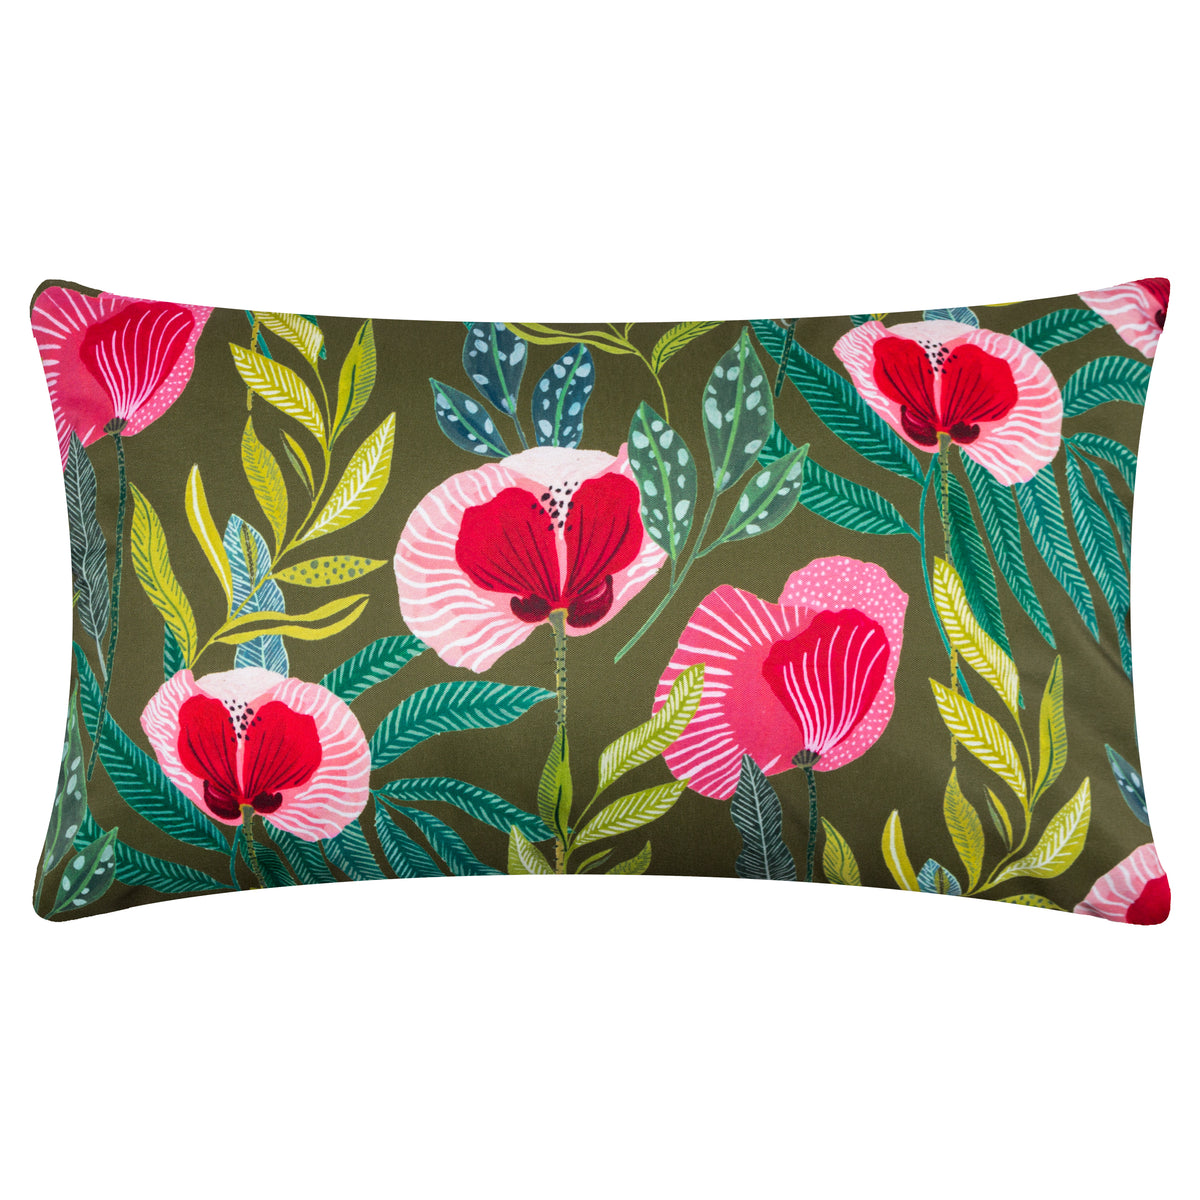 House of Bloom Poppy 50cm Outdoor Polyester Bolster Cushion